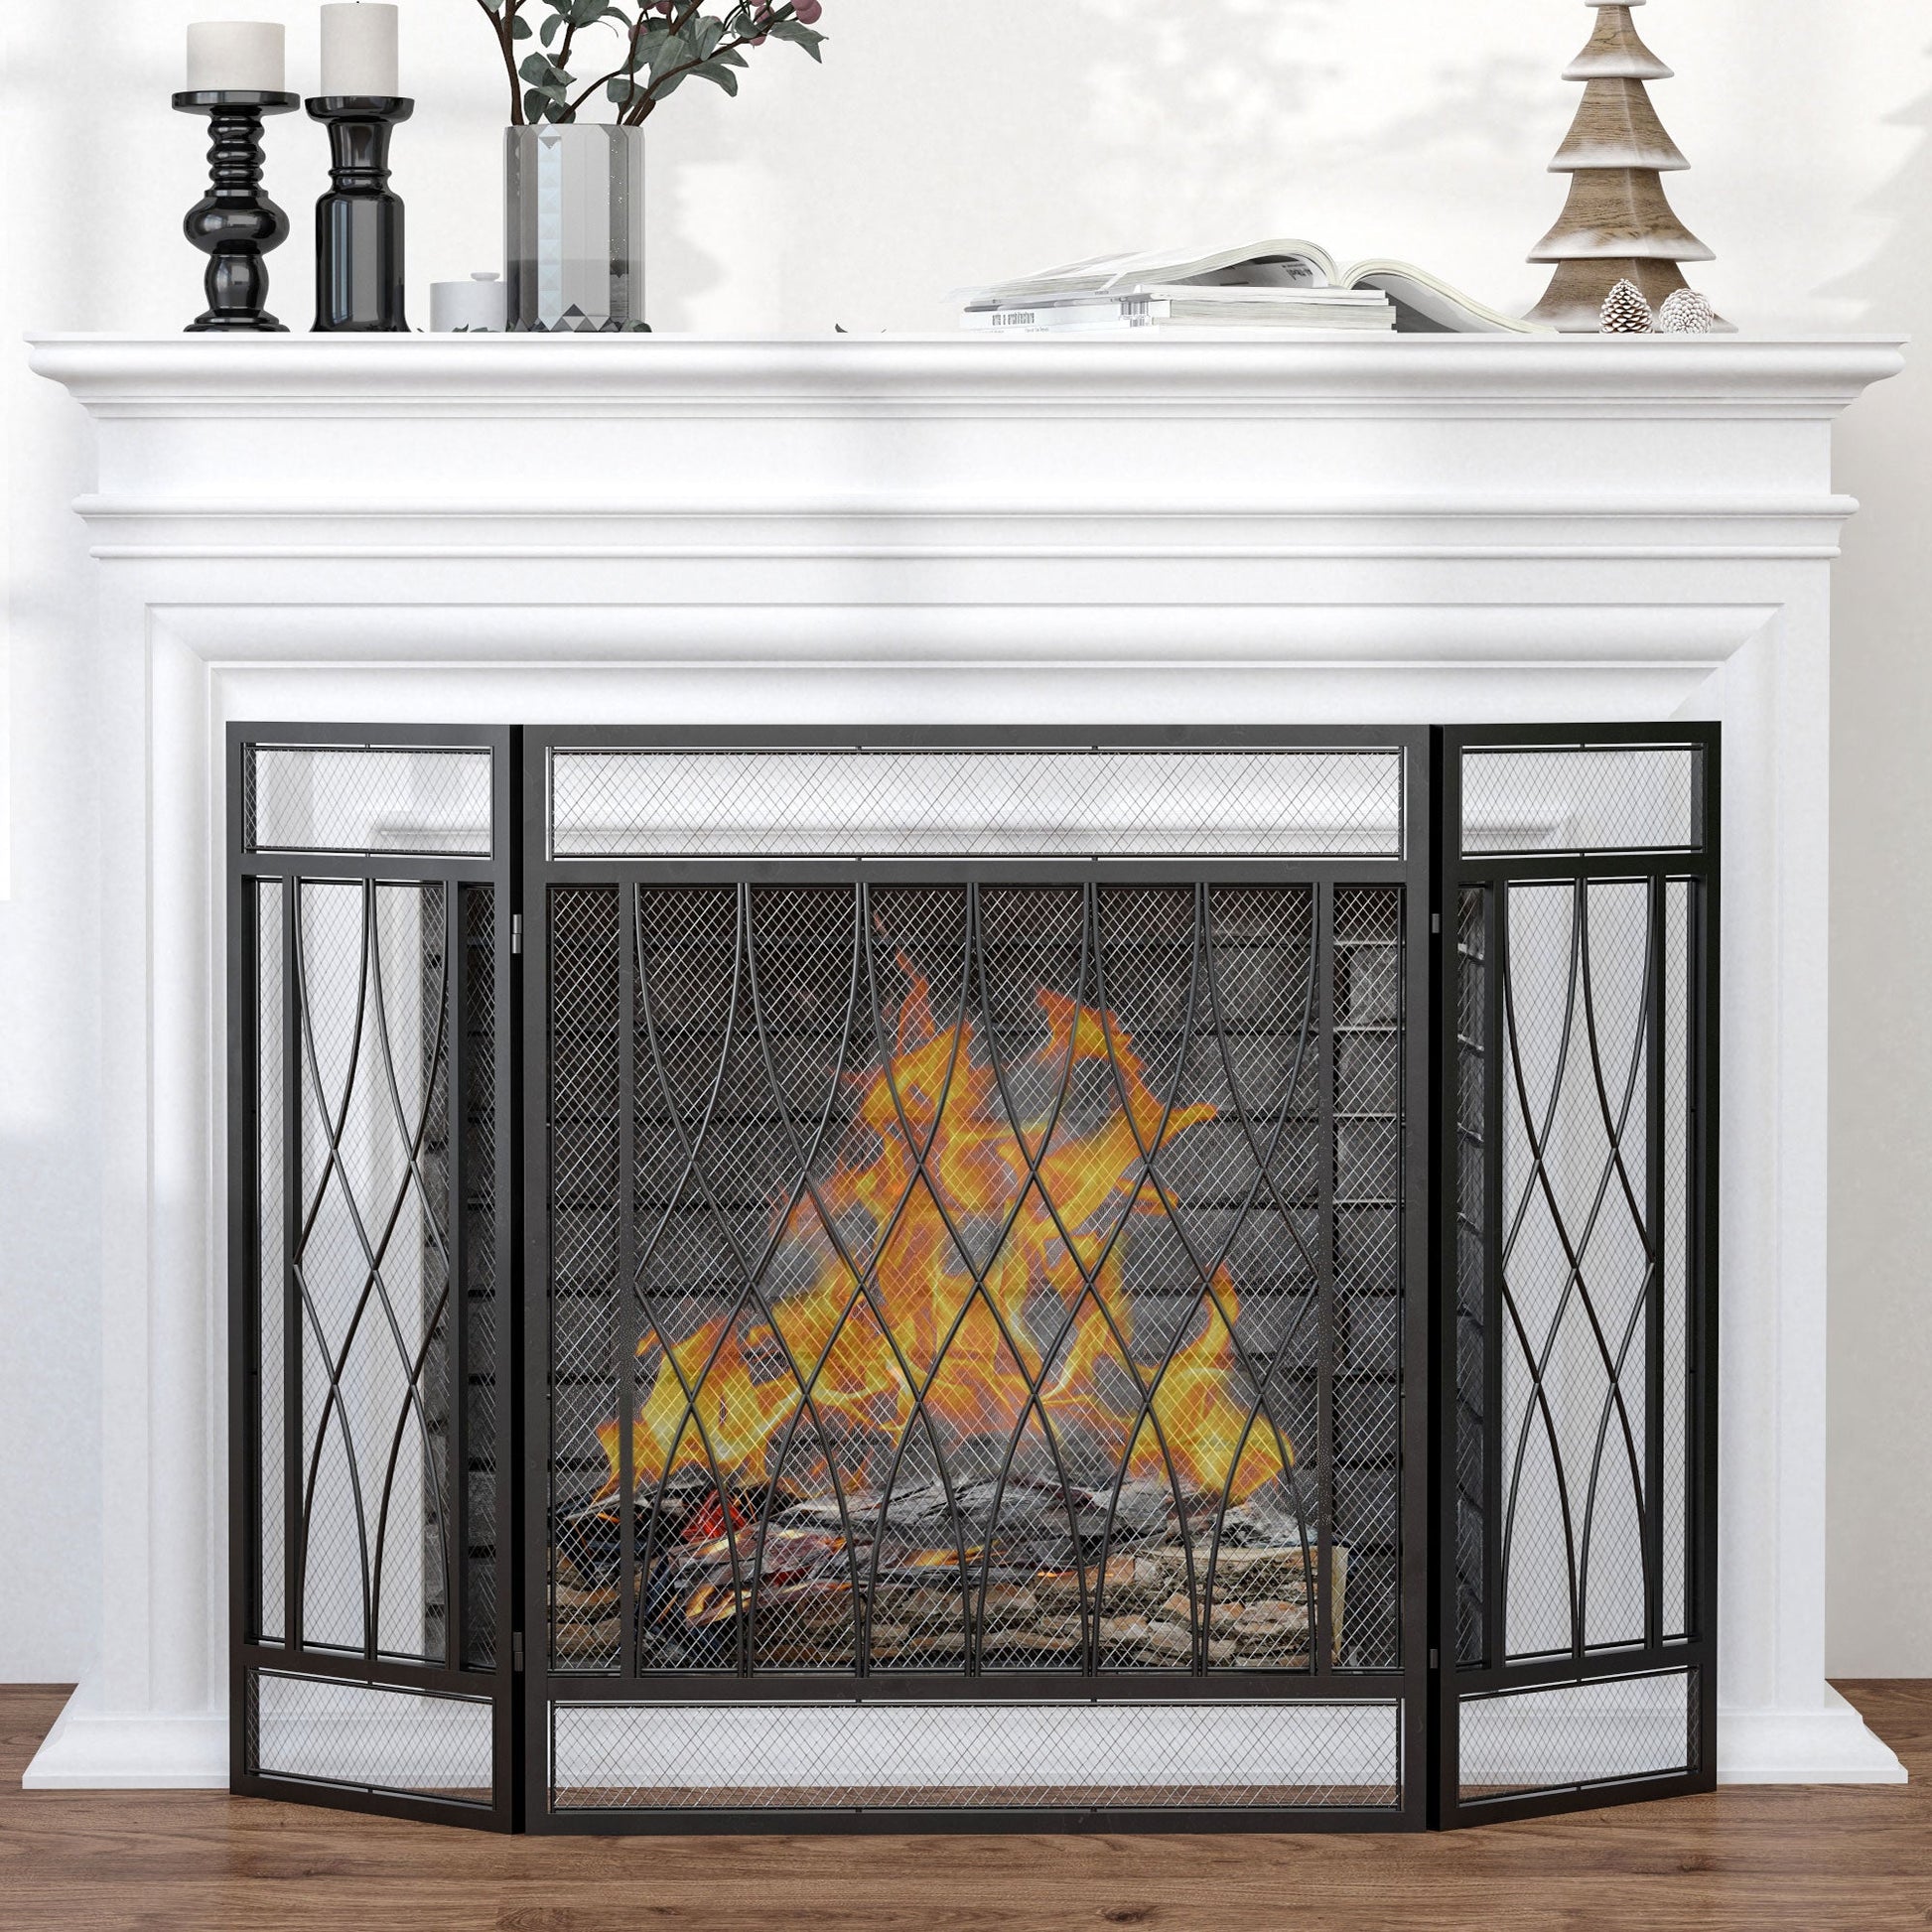 3-Panel Metal Mesh Fireplace Screen, Decorative Fire Spark Guard Cover, 49.5" x 31.5"for Living Room Home Decor, Black at Gallery Canada